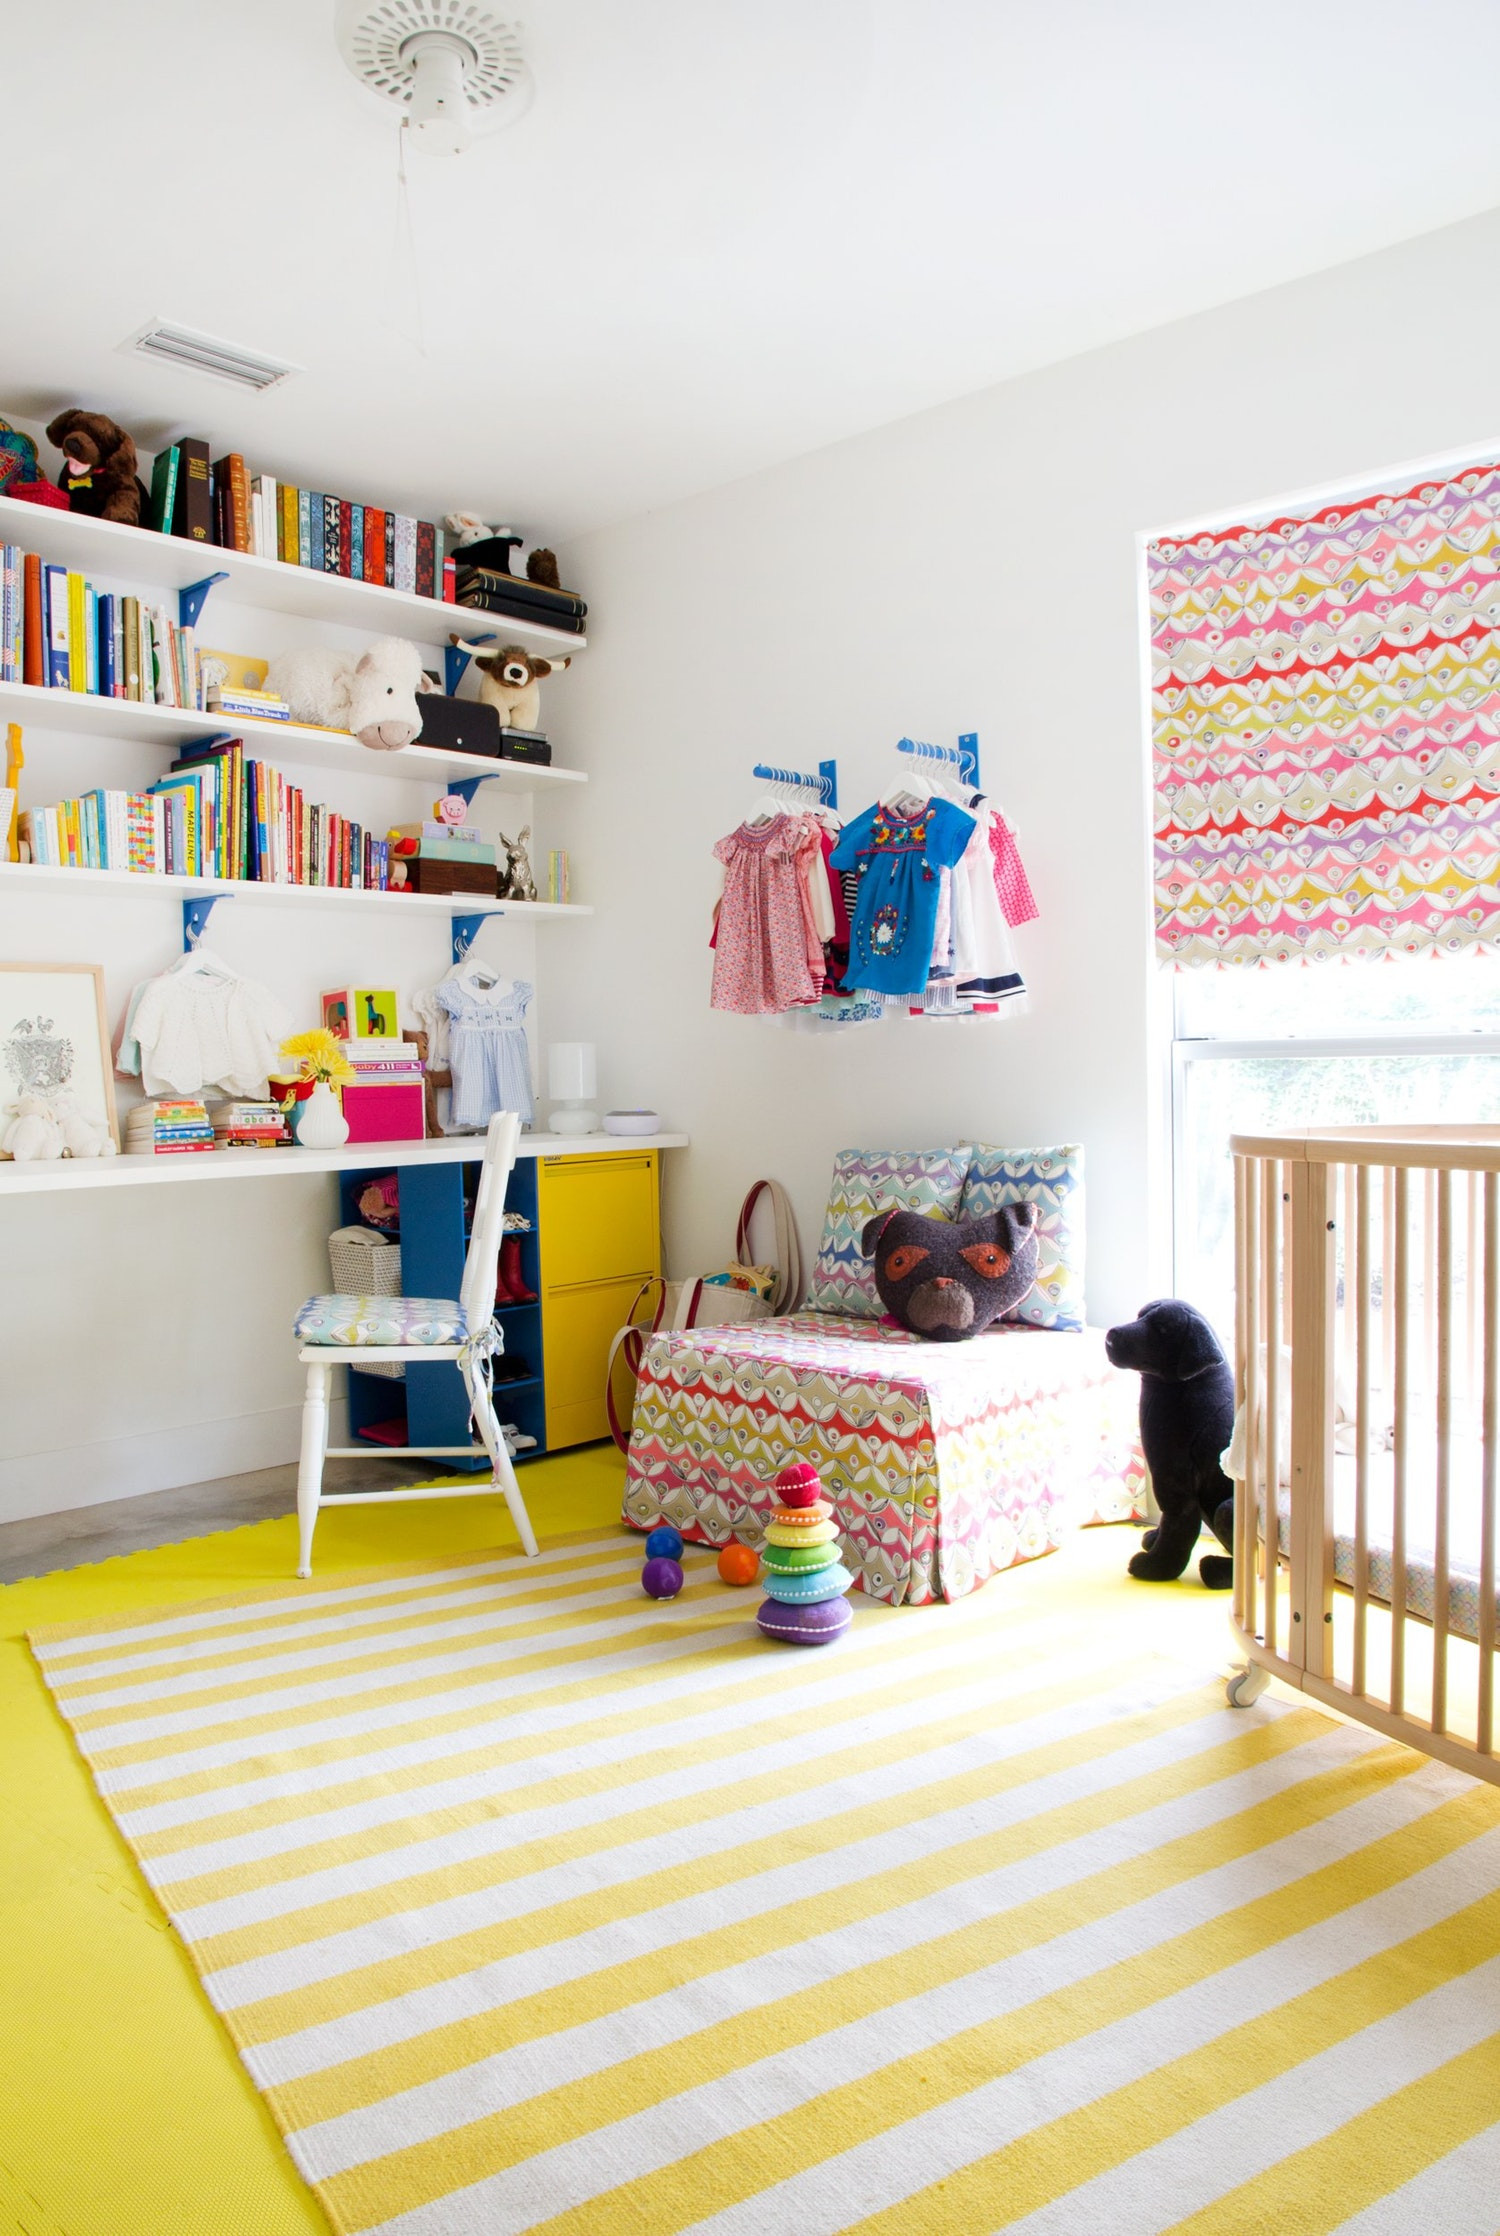 Shelving Ideas For Kids Room
 30 Smart Storage Ideas for Small Spaces